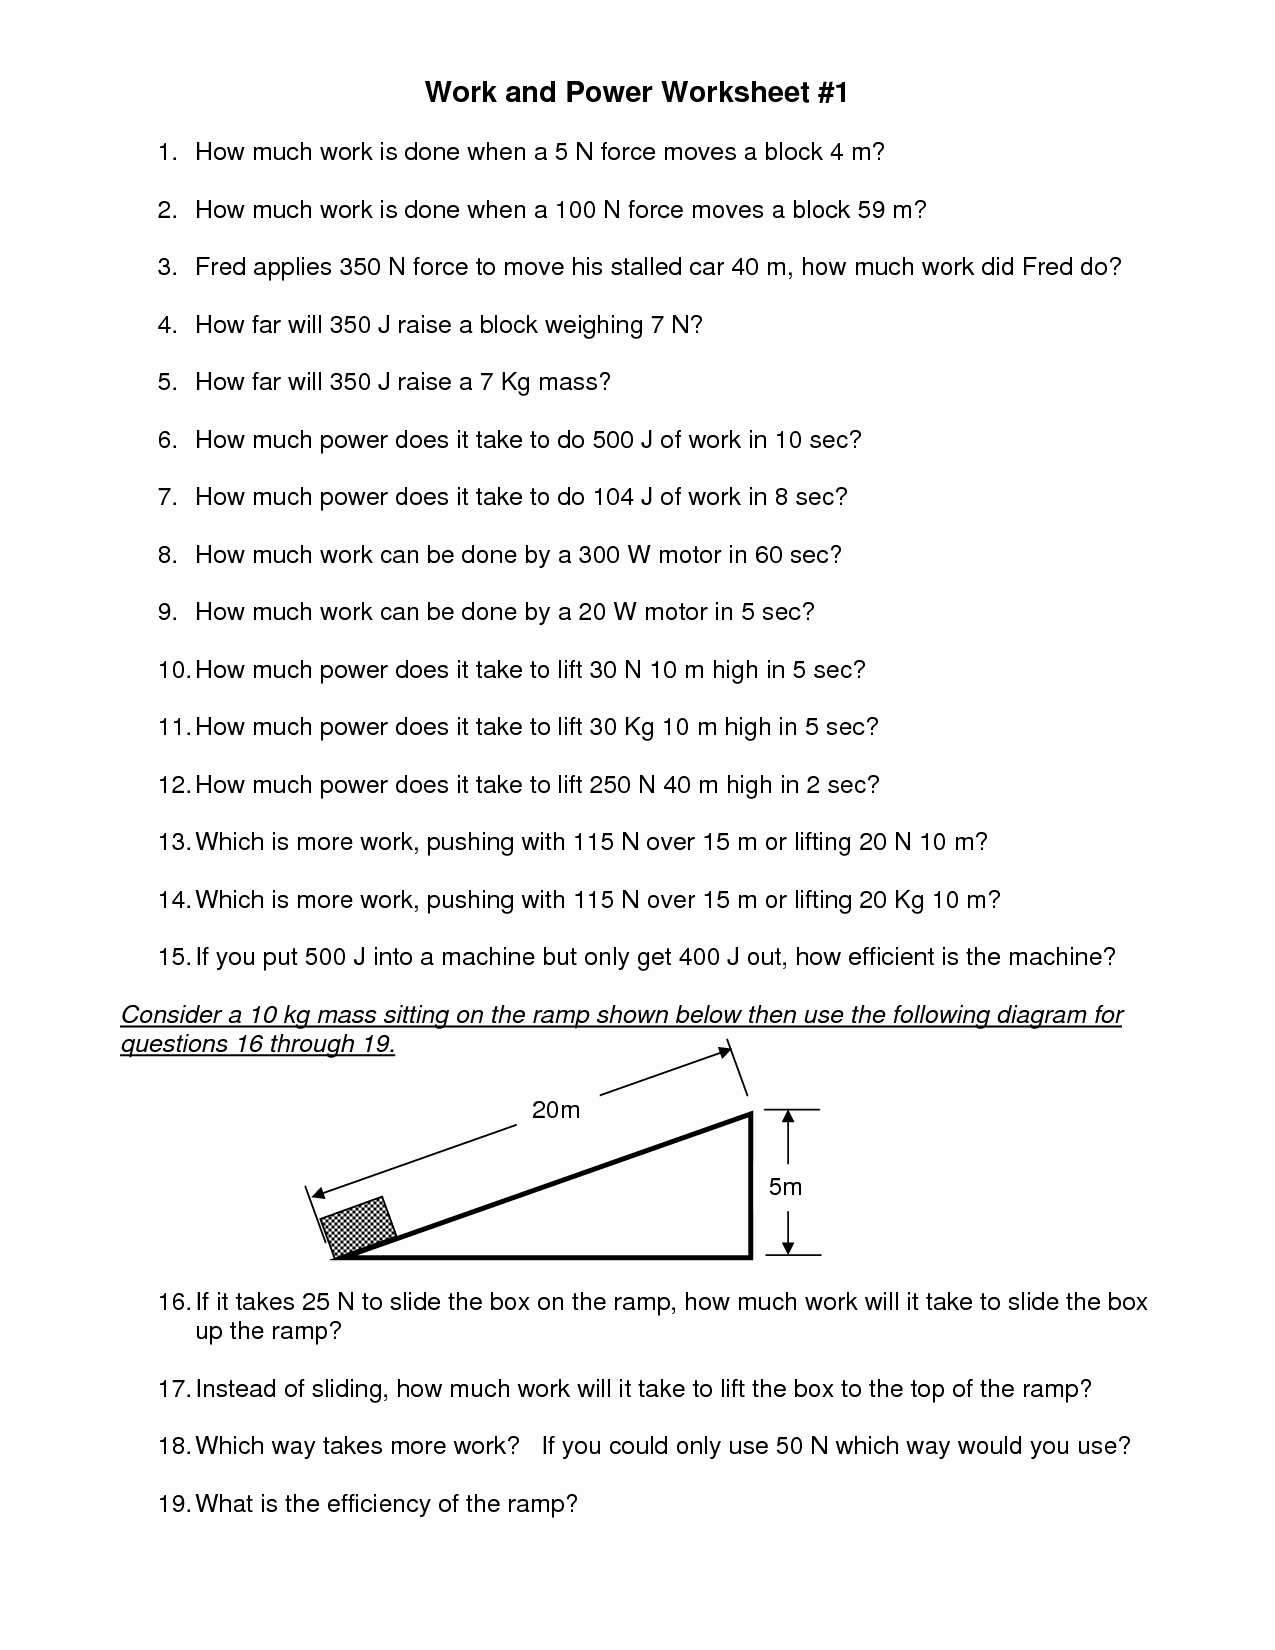 Work Power and Energy Worksheet Unique 12 Best Of Work Power and Energy Worksheet